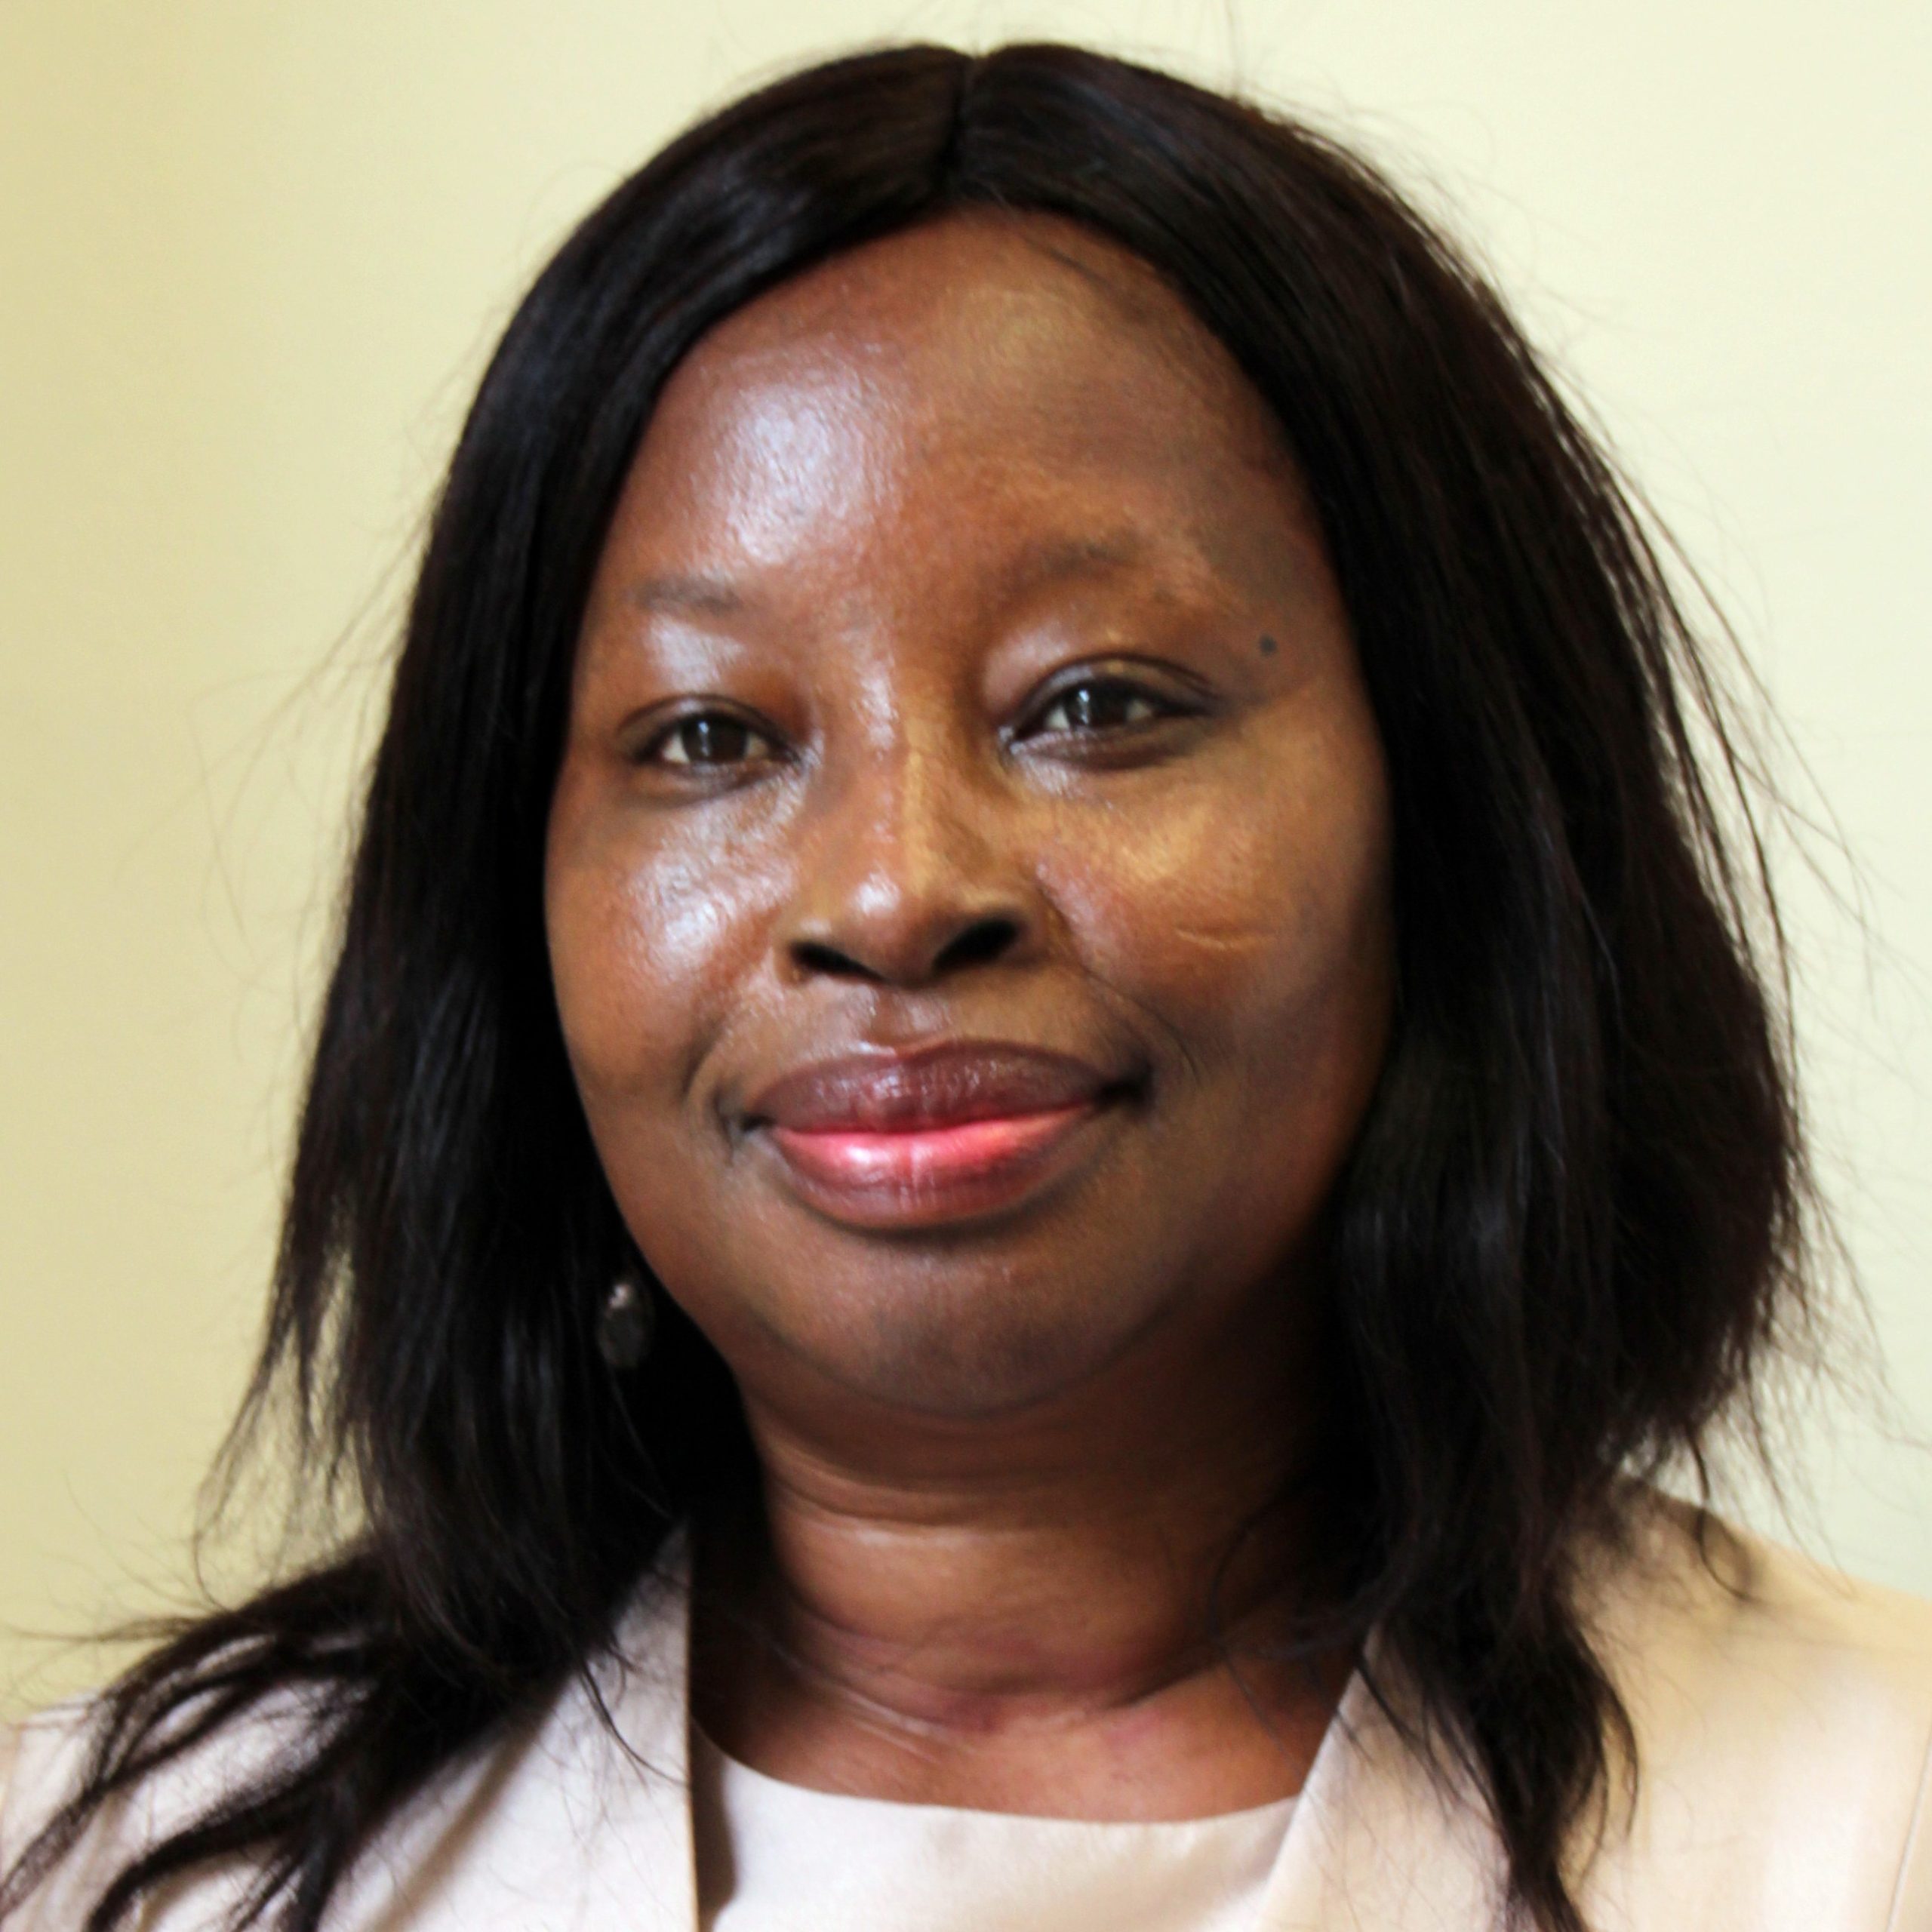 Lewes Town Councillor Janet Baah